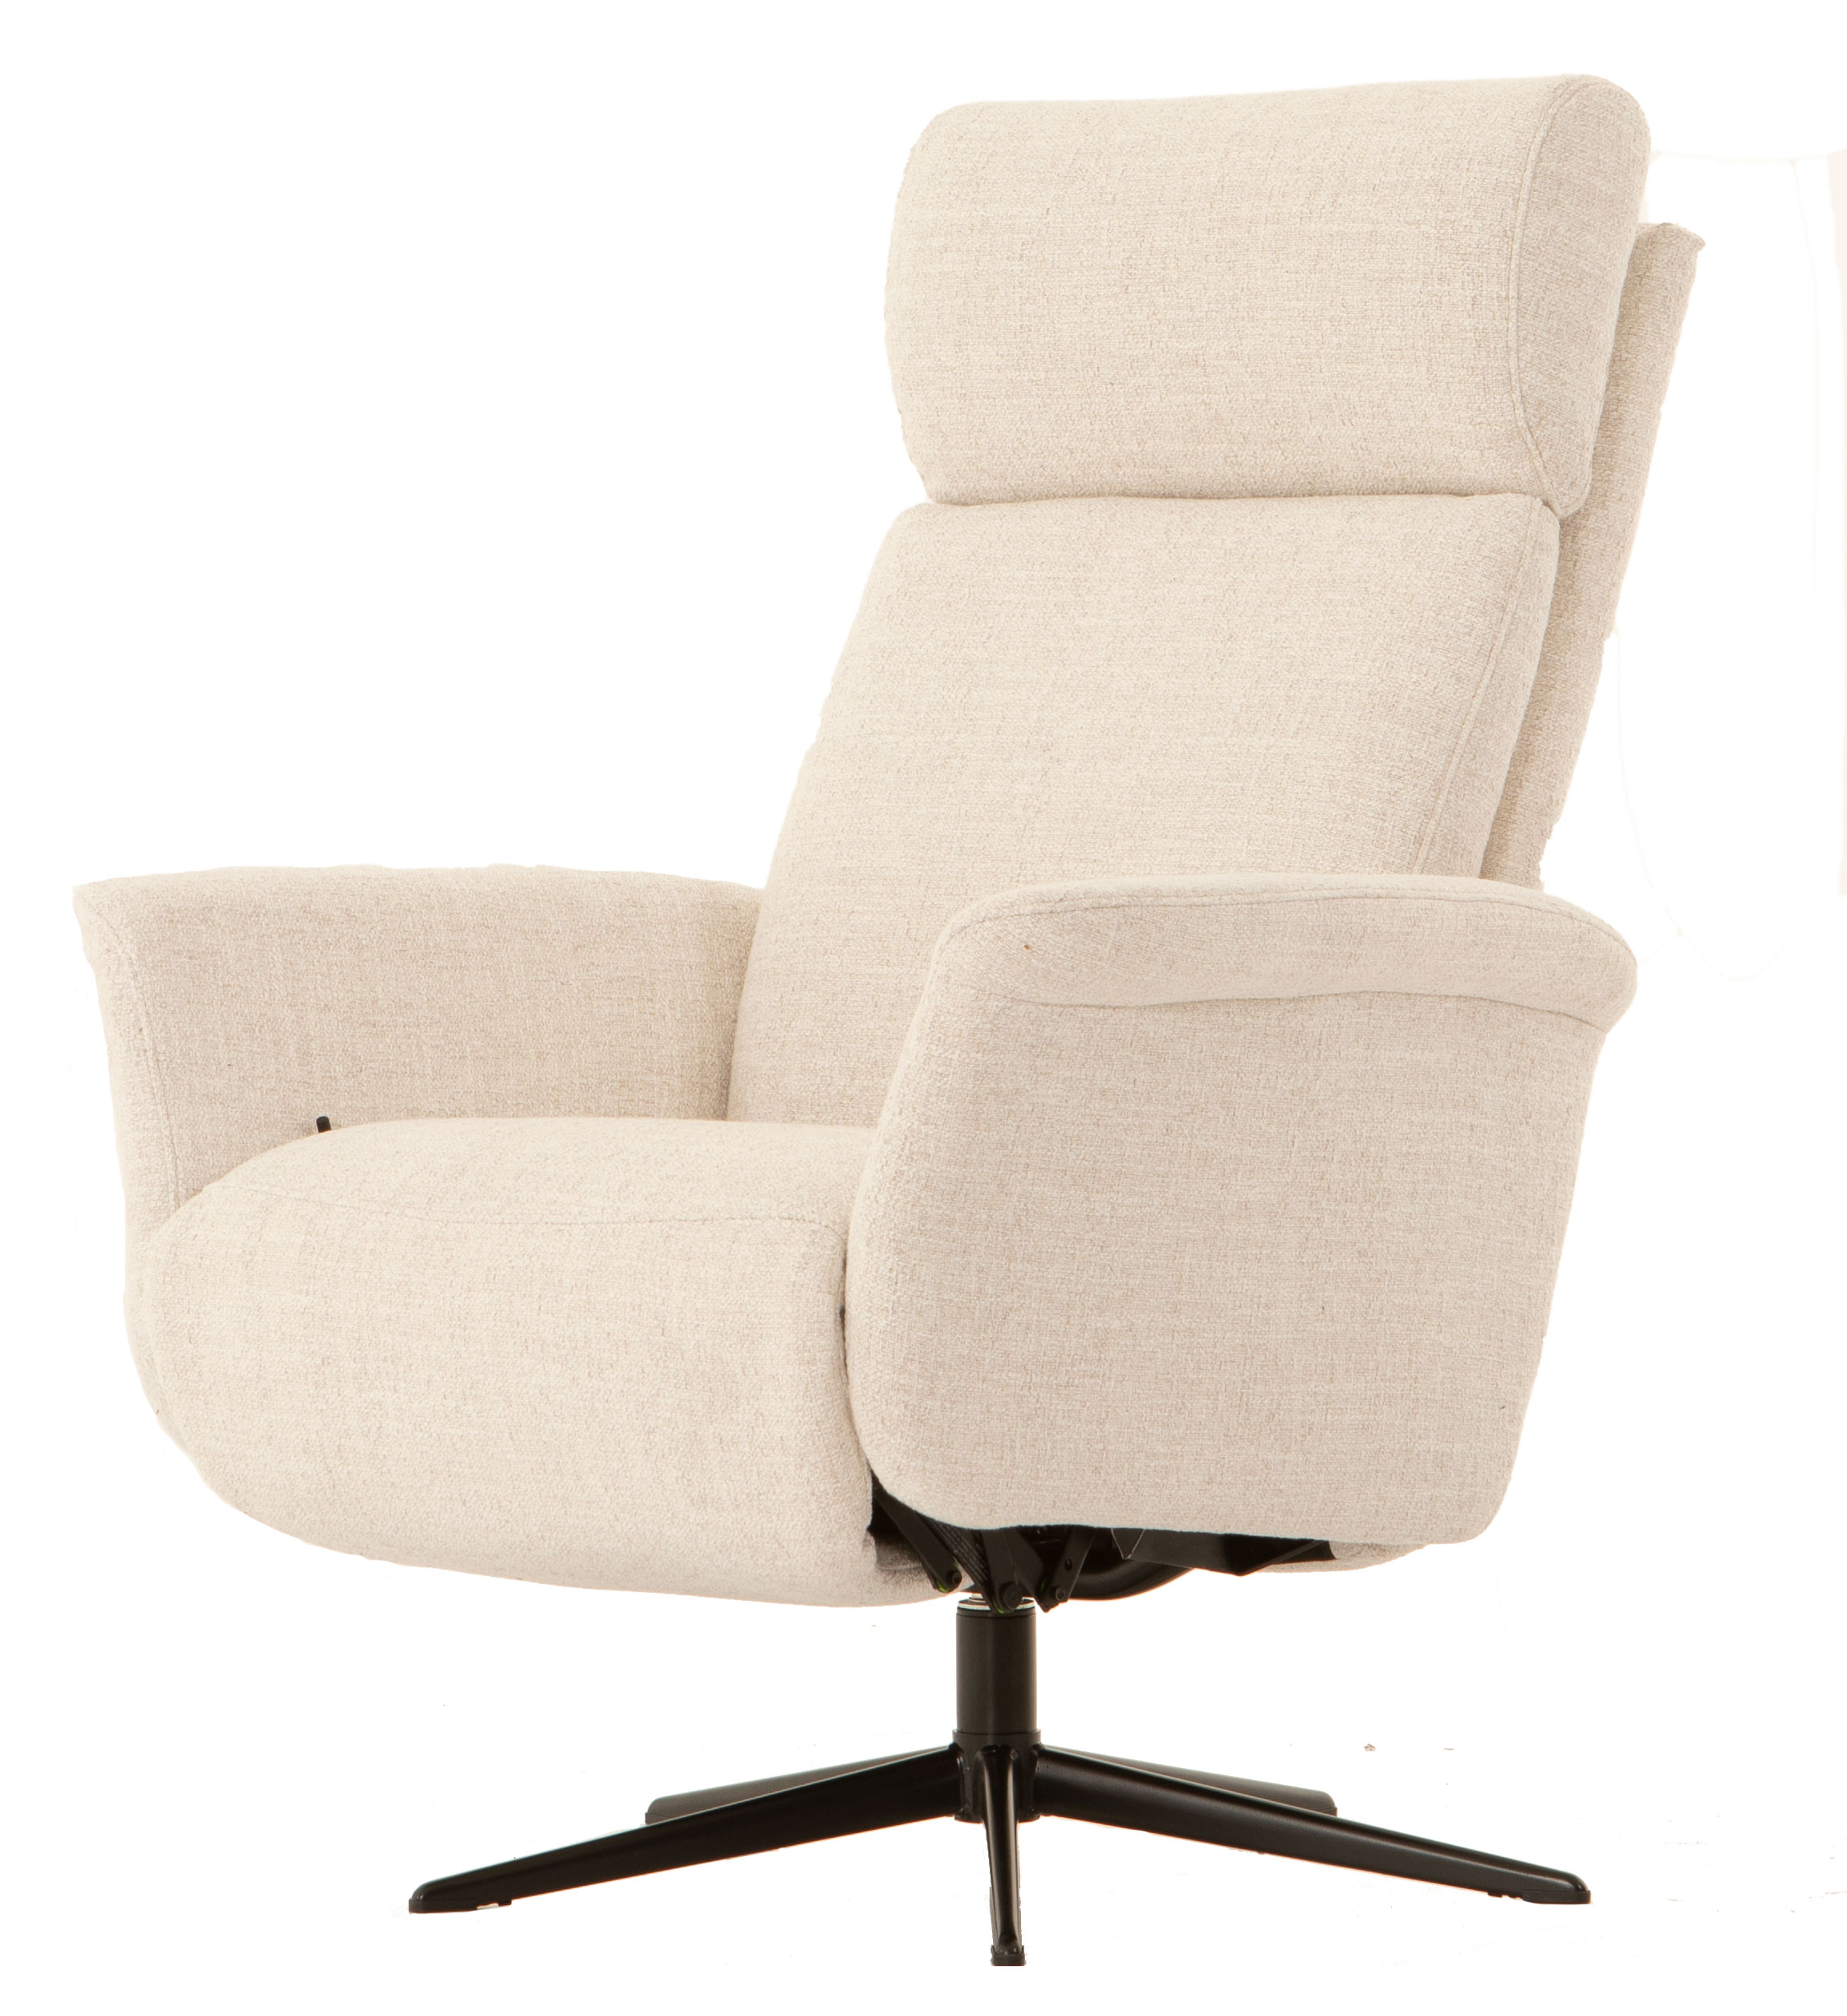 Countrylifestyle Relaxfauteuil Gert